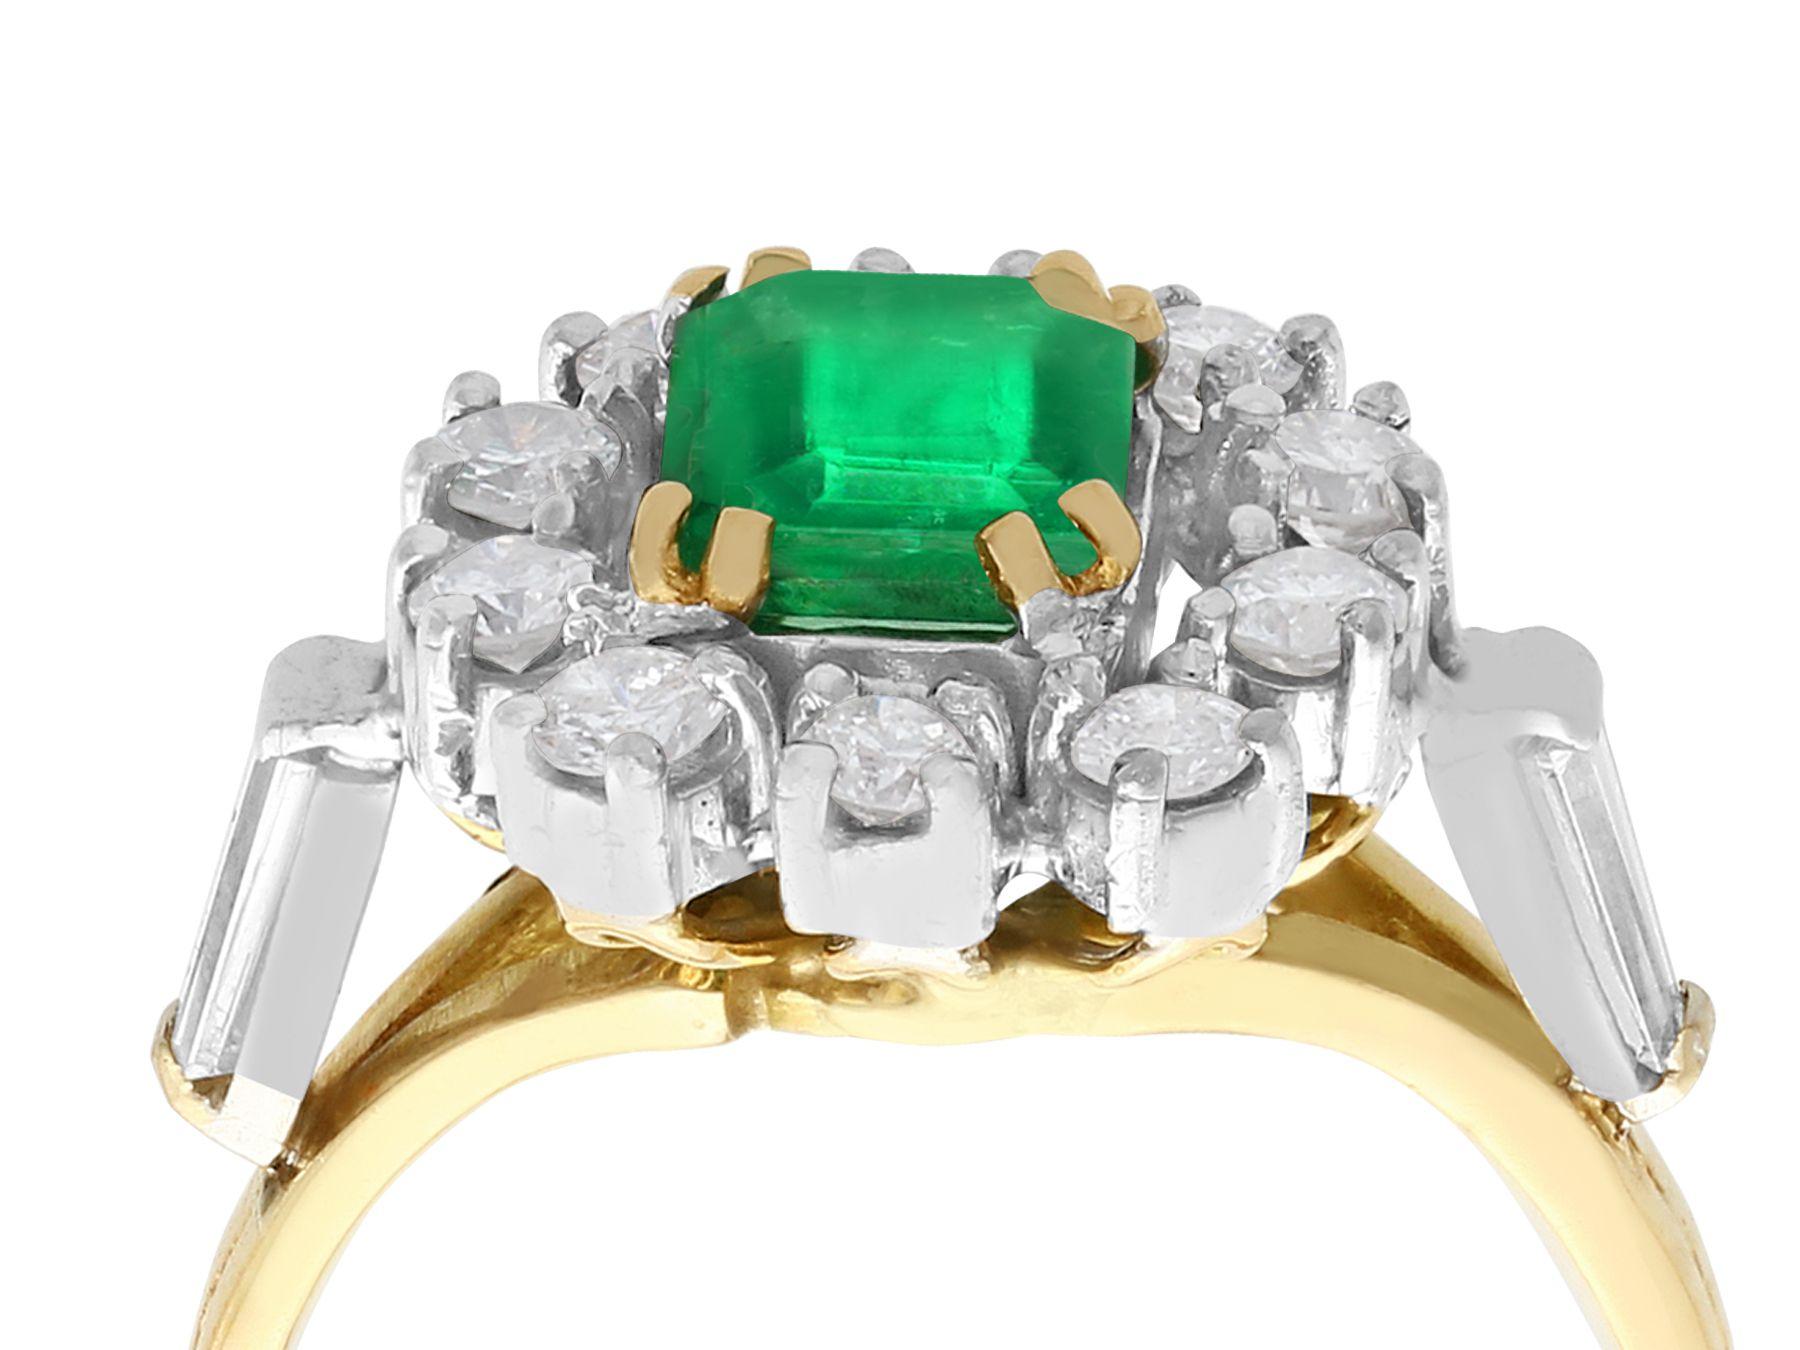 A fine and impressive vintage 0.84 carat natural emerald and 0.50 carat diamond, 18 karat yellow gold cluster ring; part of our vintage jewelry and estate jewelry collections

This impressive vintage emerald cut cluster ring has been crafted in 18k